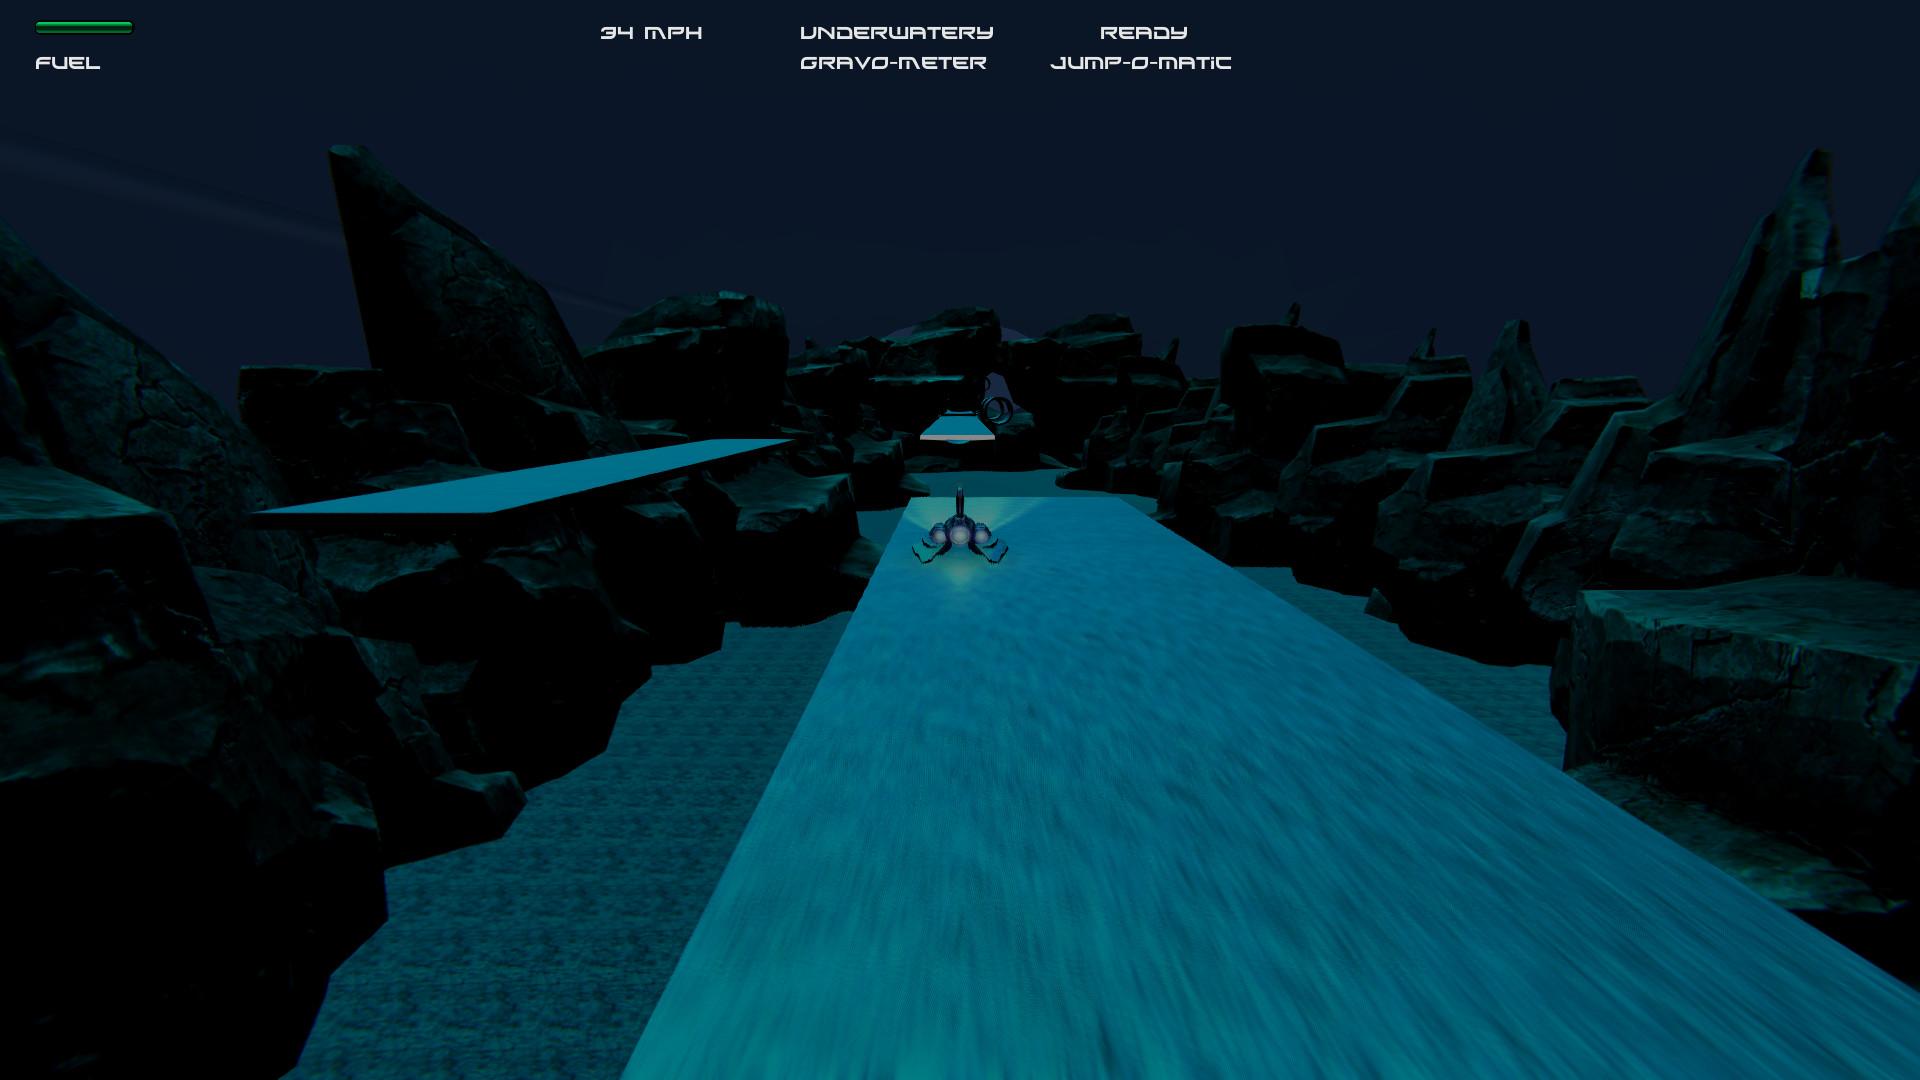 Screenshot №6 from game SpaceRoads